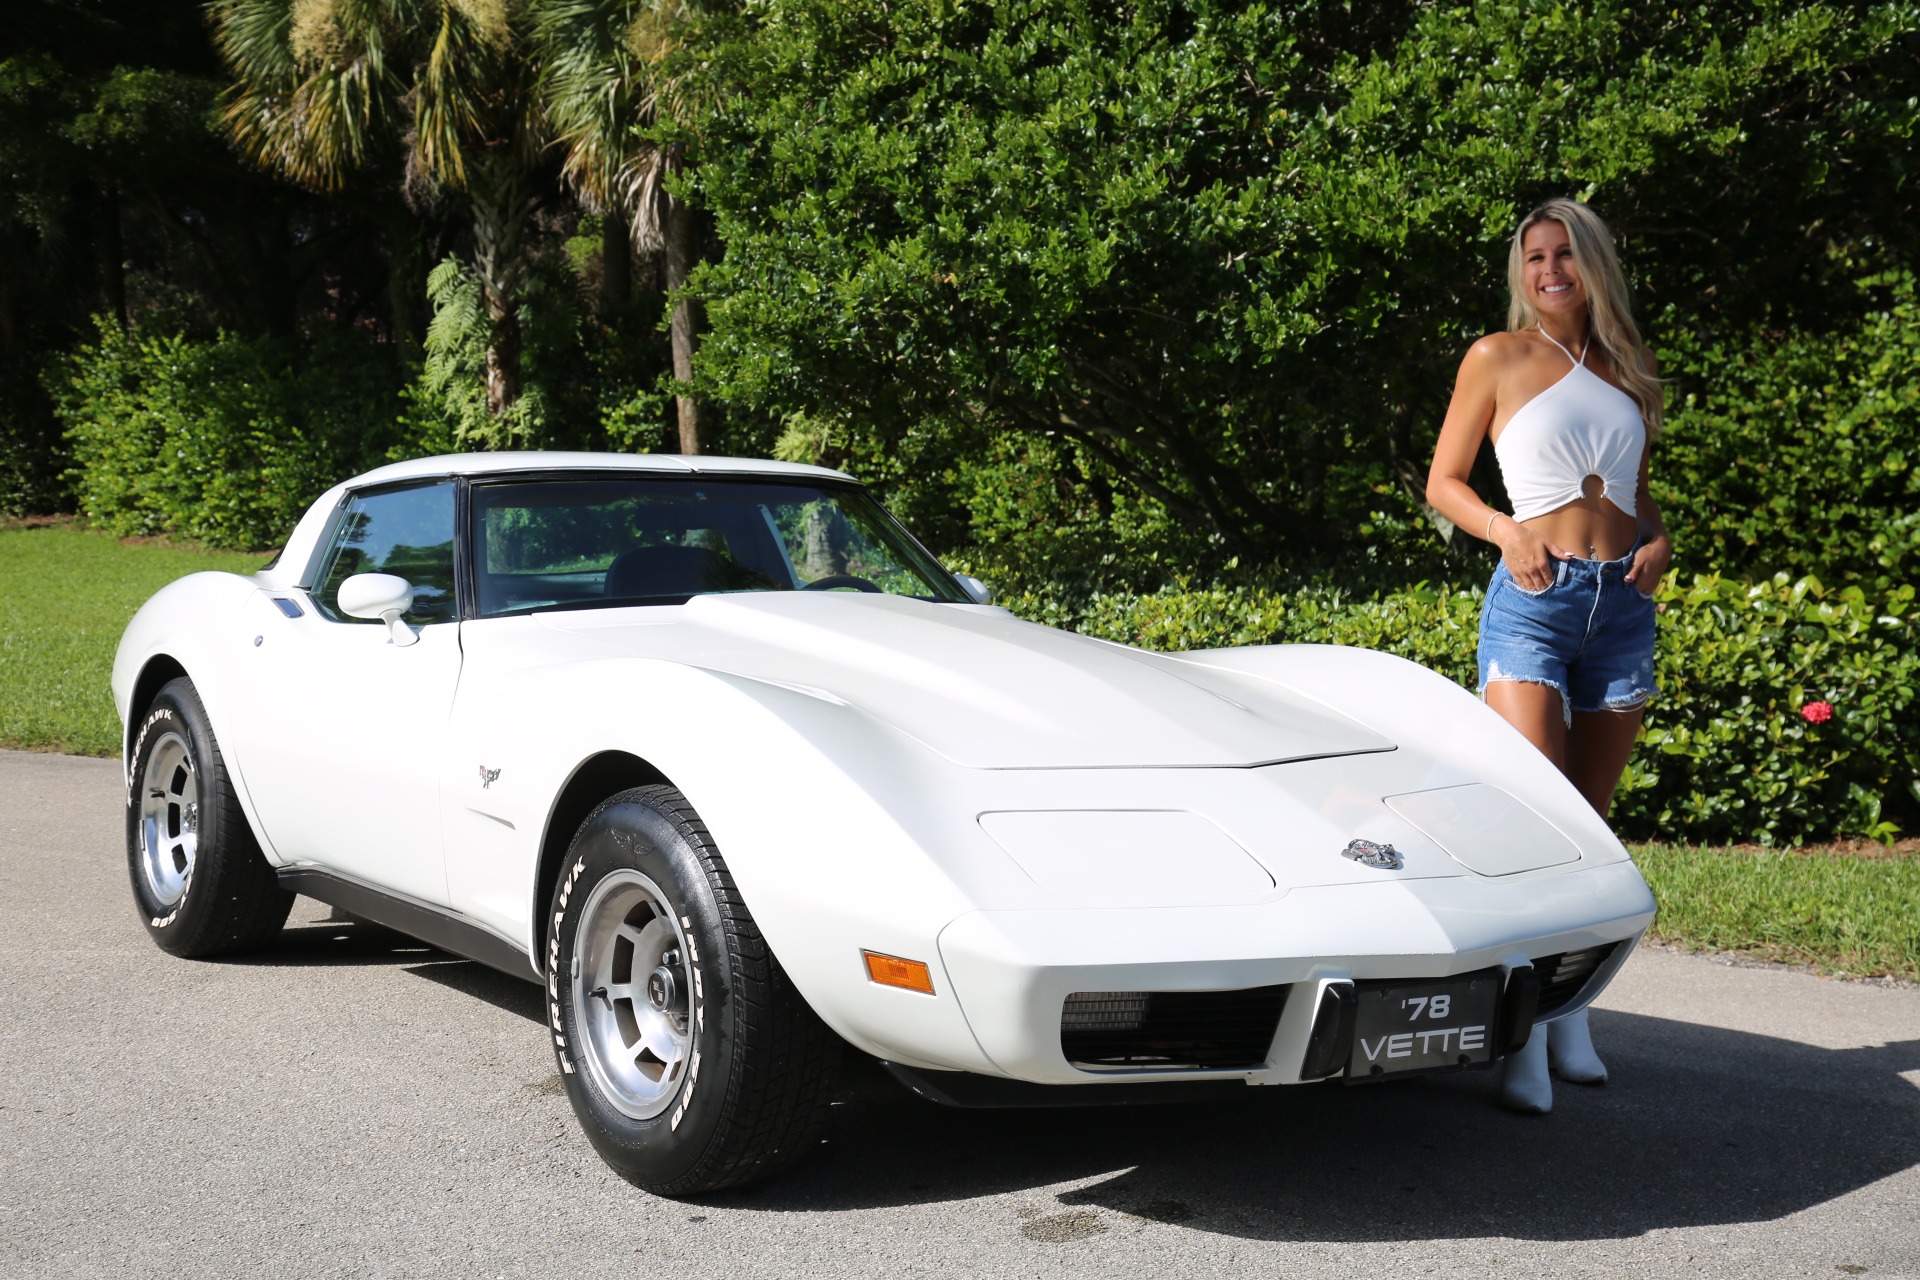 Used 1978 Chevrolet Corvette Anniversary Edition for sale $15,800 at Muscle Cars for Sale Inc. in Fort Myers FL 33912 6